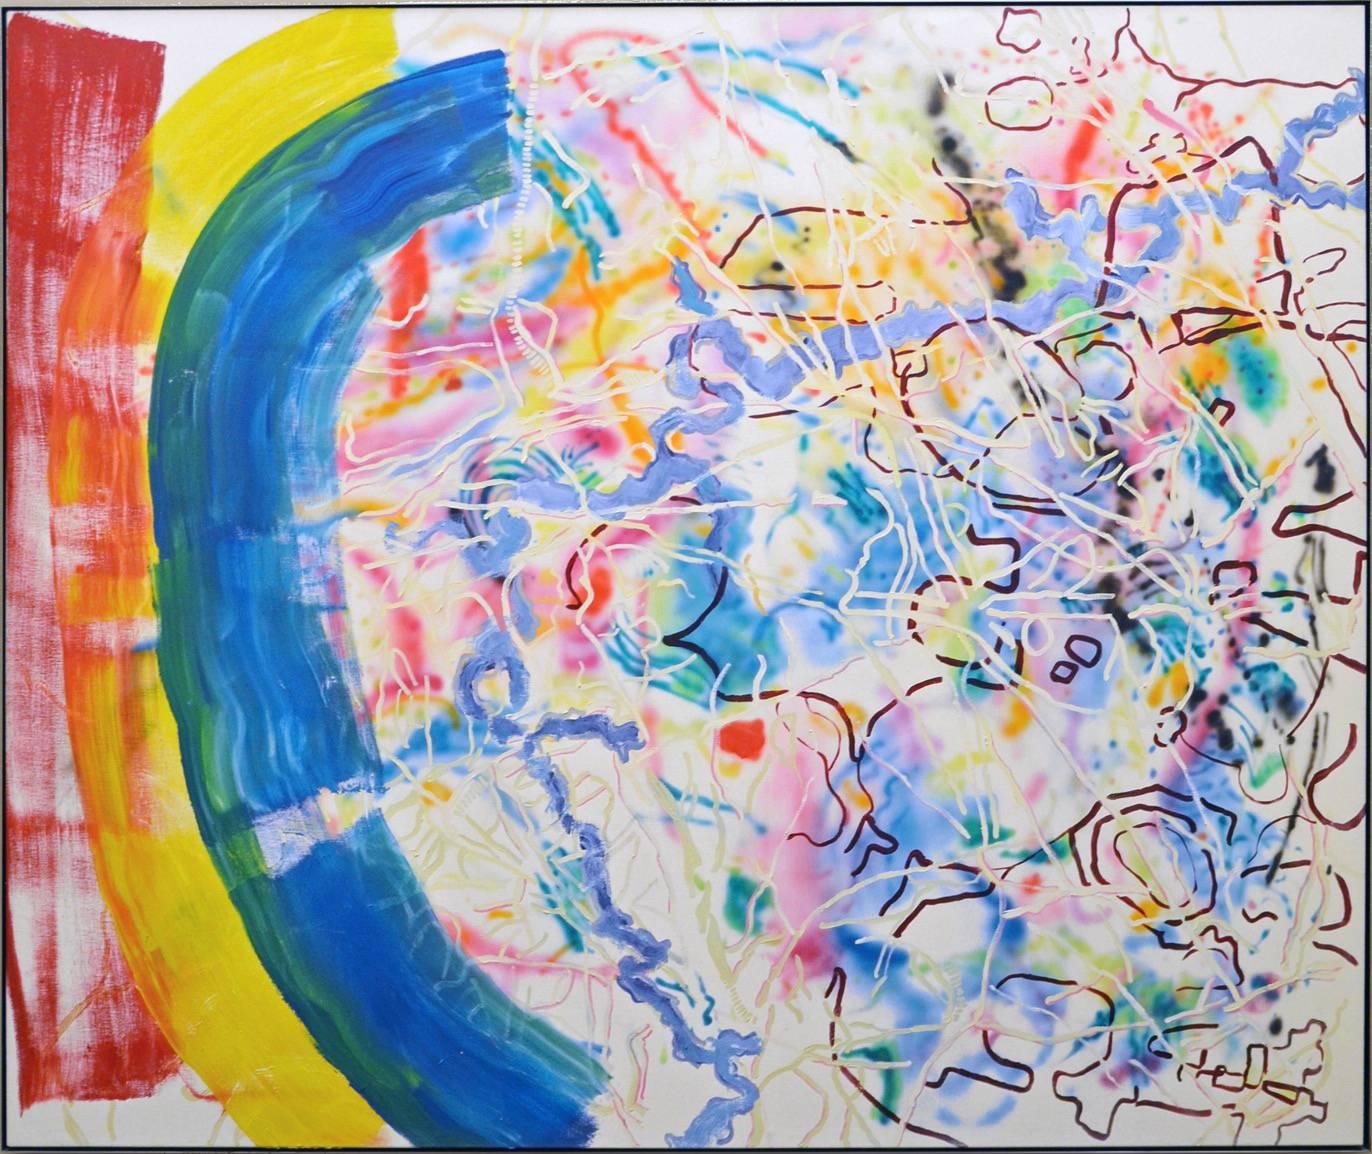 "RBY" 1980 oil/canvas - Large Very colorful abstract yellow red blue green white - Painting by Nancy Graves